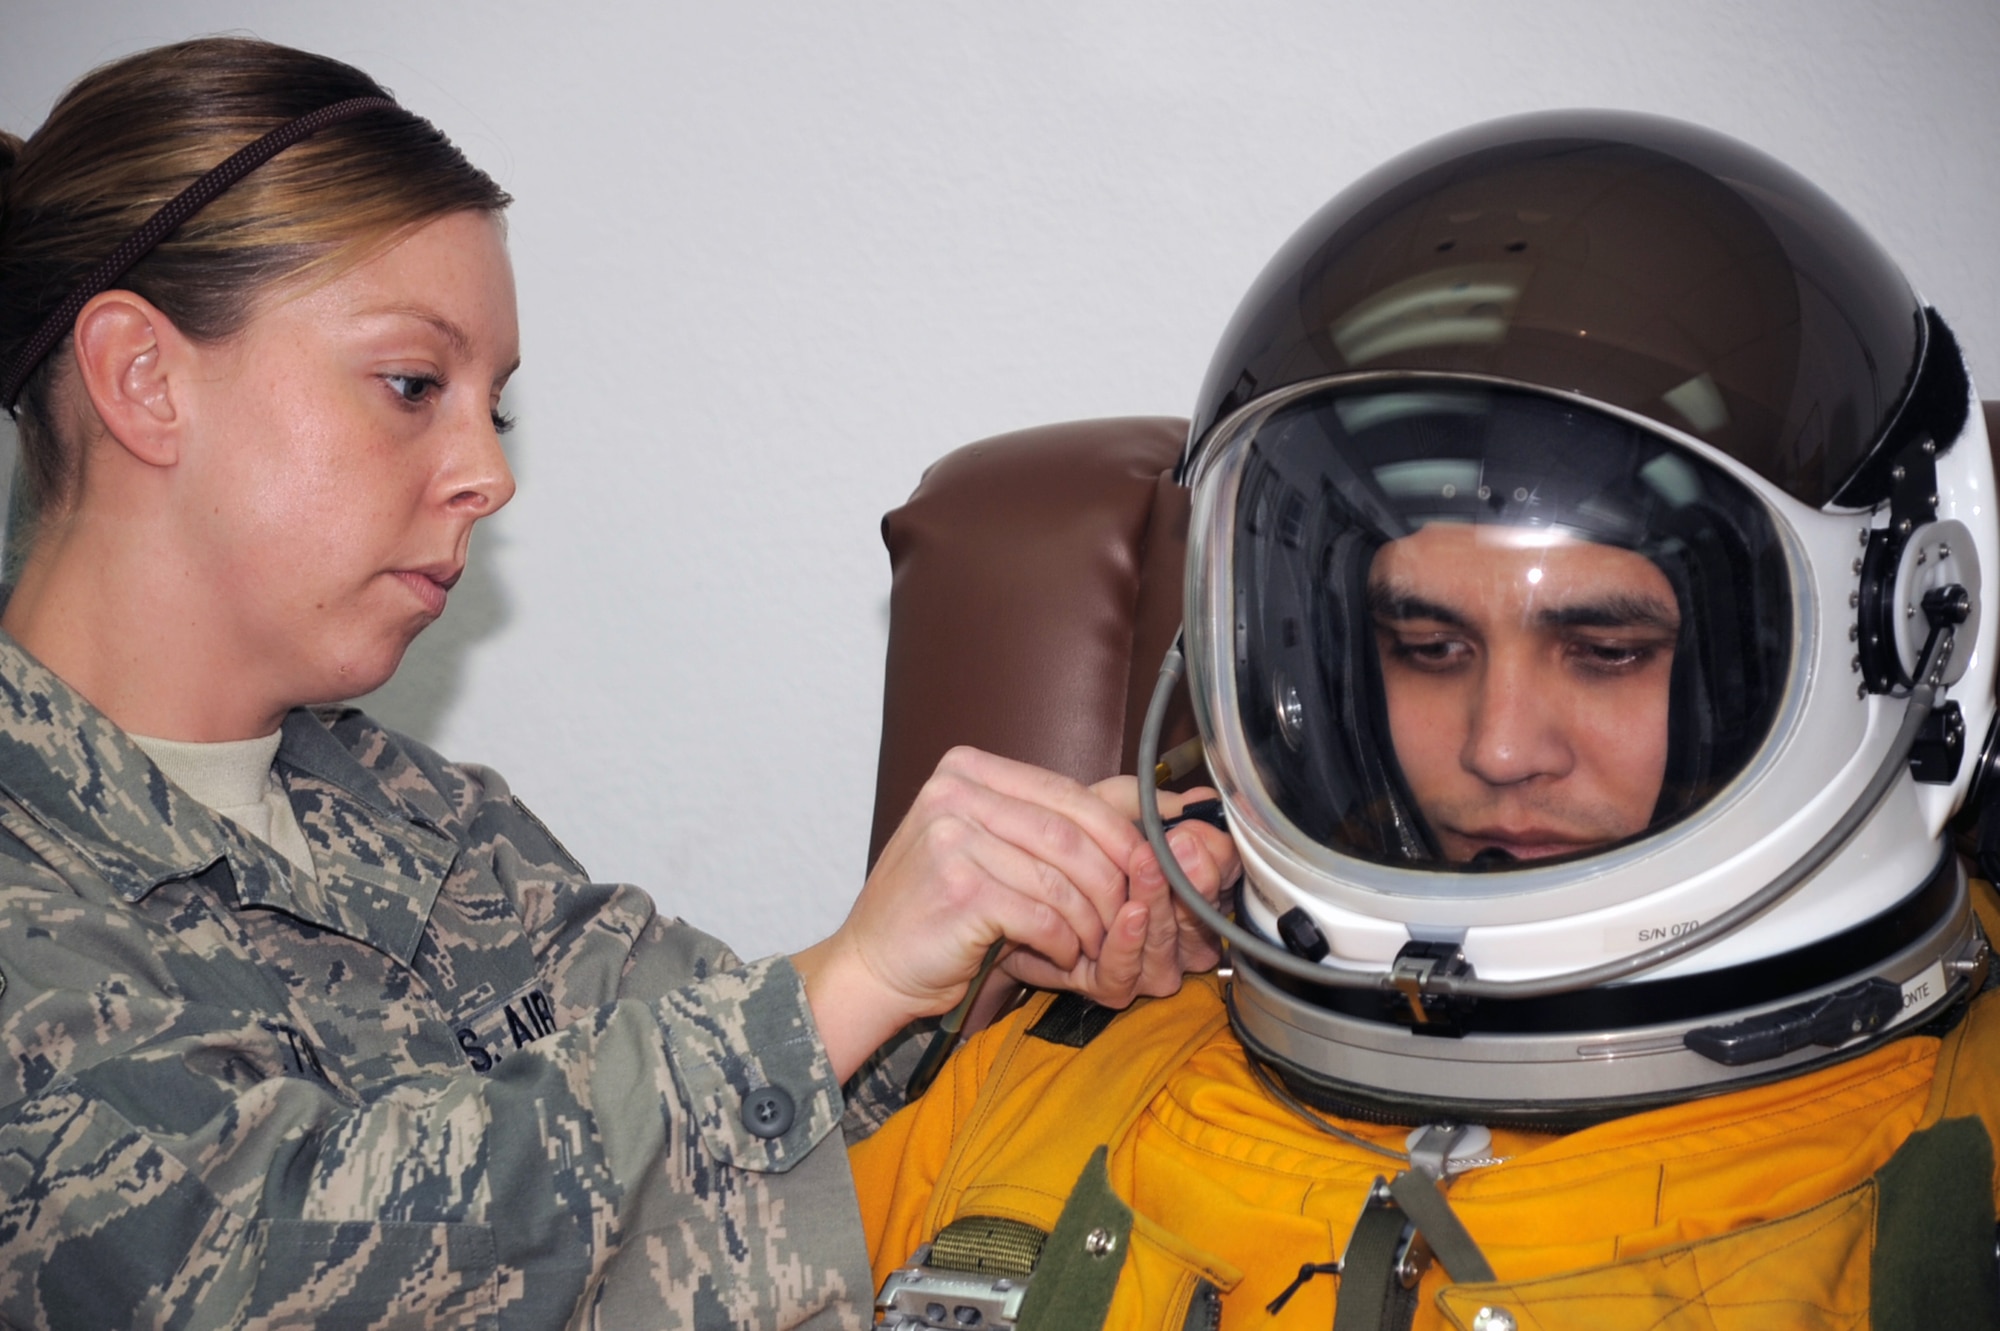 Staff Sgt. Lynnette Keeton, aerospace physiologists with the 99th Expeditionary Reconnaissance Squadron, helps gear up Capt. Tony Aponte, U-2 Dragon Lady pilot, before Captain Aponte was to go on a mission on Jan. 23, 2010, at a non-disclosed location in Southwest Asia.  Because the U-2 flies as high an altitude as 70,000 feet, pilots are required to wear a special suit to complete their mission.  The 99th ERS, part of the 380th Air Expeditionary Wing, supports Operations Iraqi Freedom and Enduring Freedom and the Combined Joint Task Force-Horn of Africa. (U.S. Air Force Photo/Tech. Sgt. Scott T. Sturkol/Released)